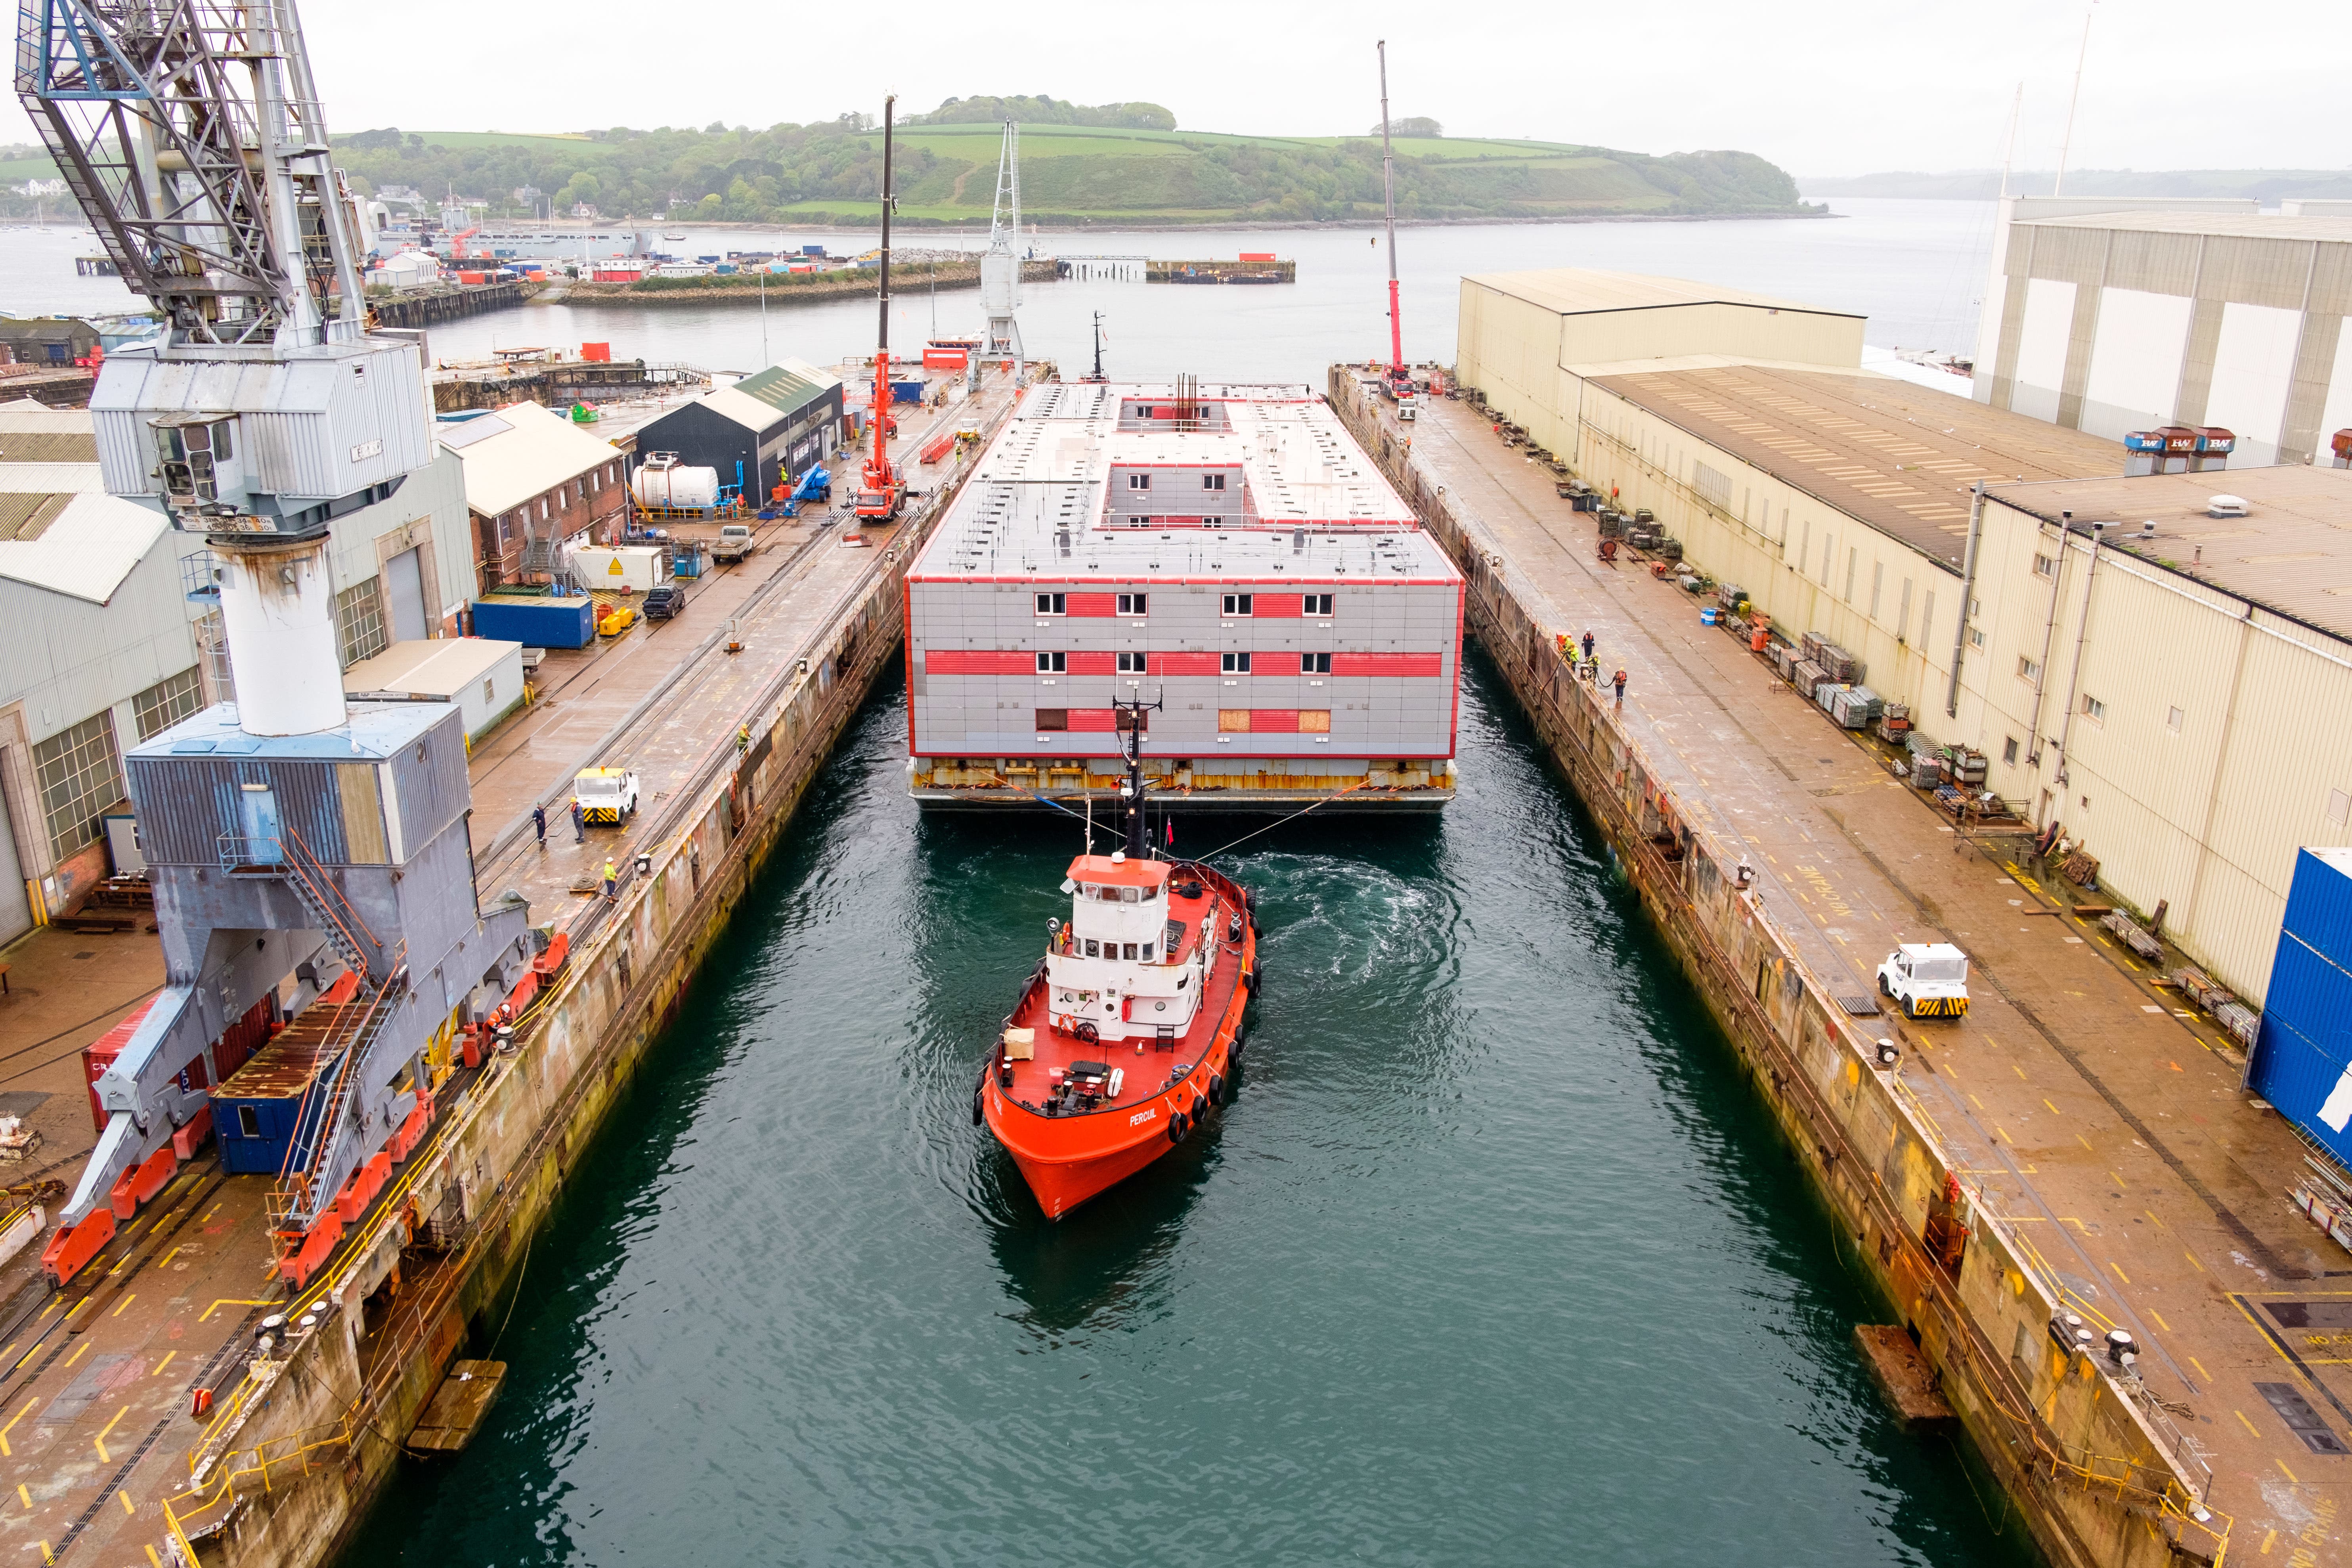 The Bibby Stockholm accommodation barge arrives into Falmouth docks in Cornwall